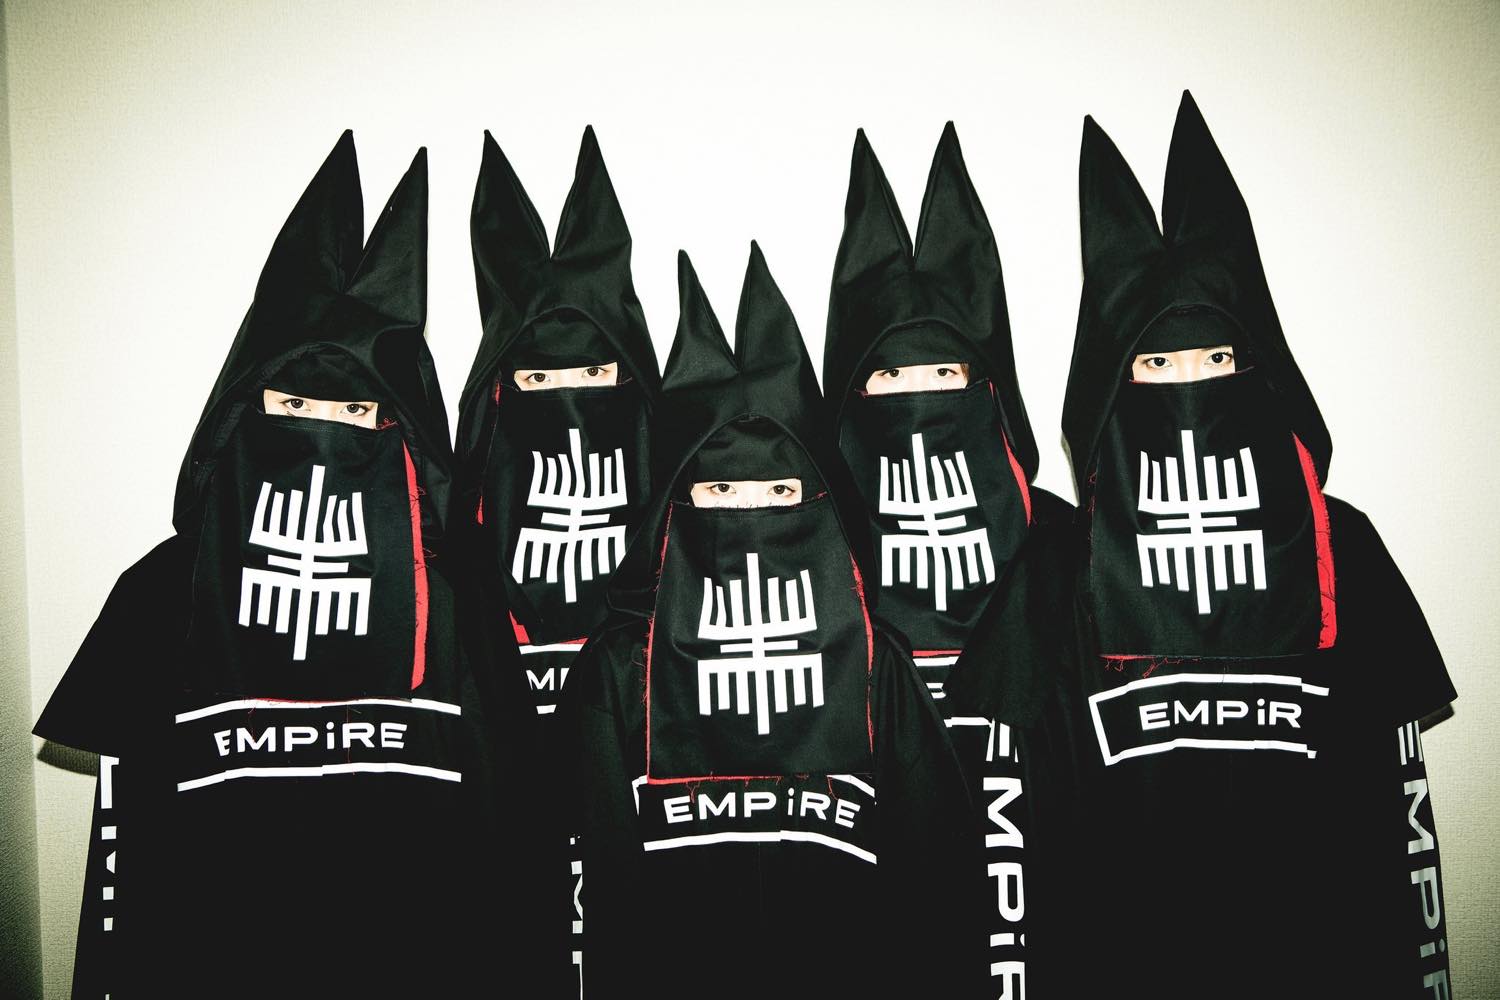 EMPiRE Unmasked! All Members’ Faces Revealed!